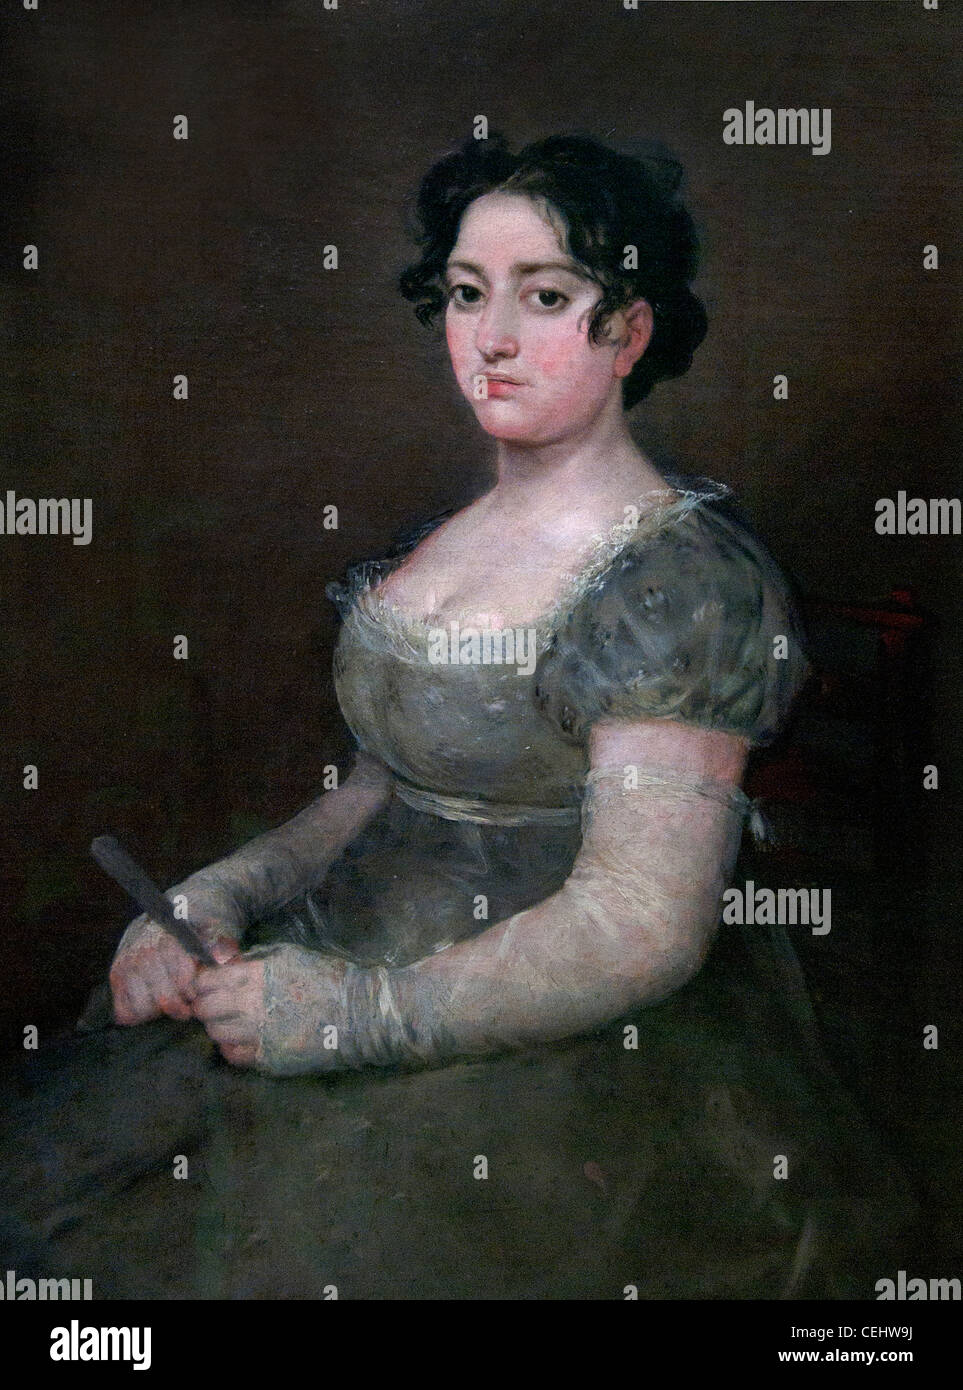 The Lady with a Fan Francisco Jose de Goya y Lucientes1746 - 1828 Spain Spanish Stock Photo